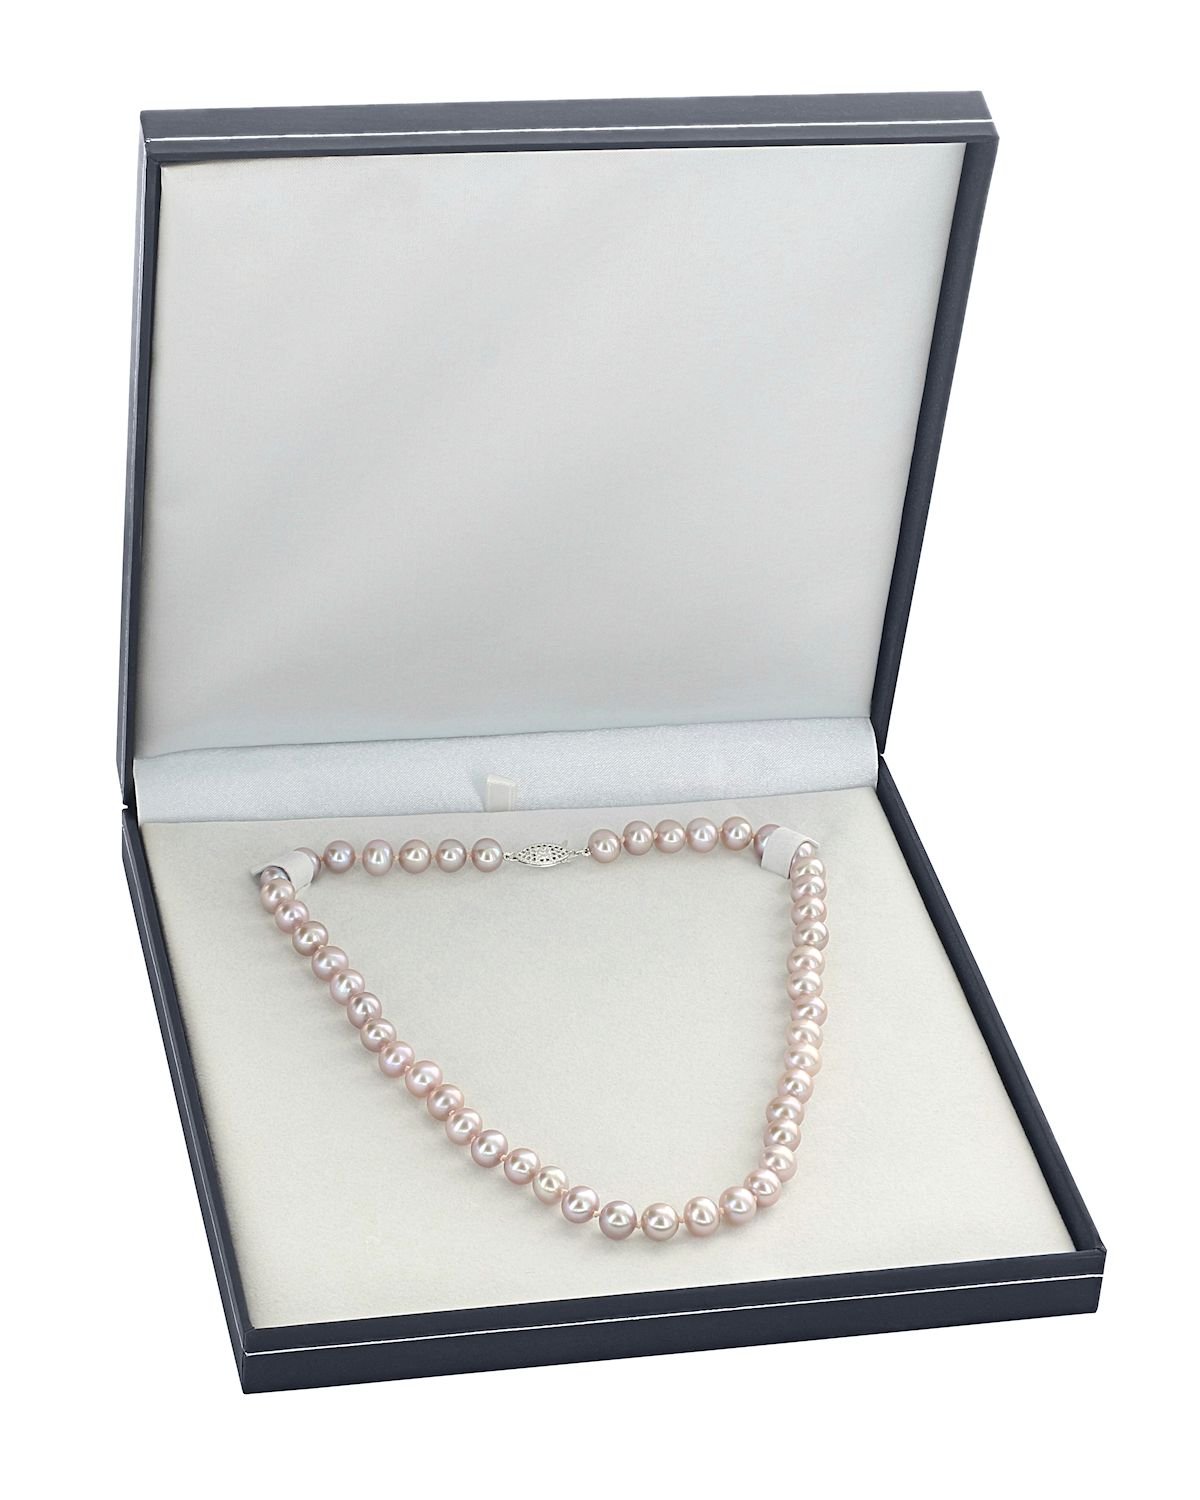 9.5-10.5mm Peach Freshwater Pearl Necklace - AAA Quality - Secondary Image